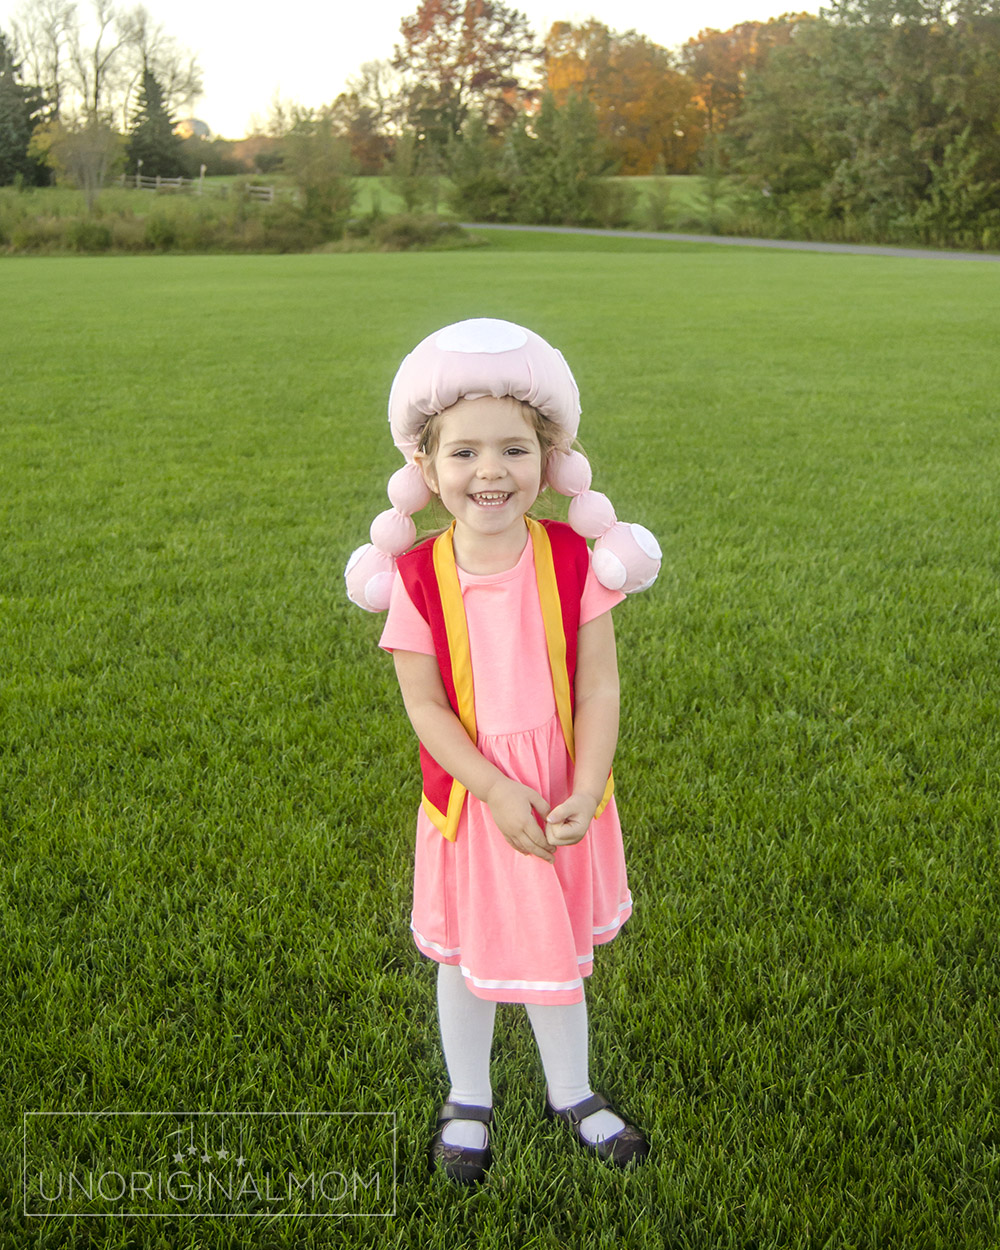 DIY toadette halloween costume, with a toadette hat made out of a bike helmet!